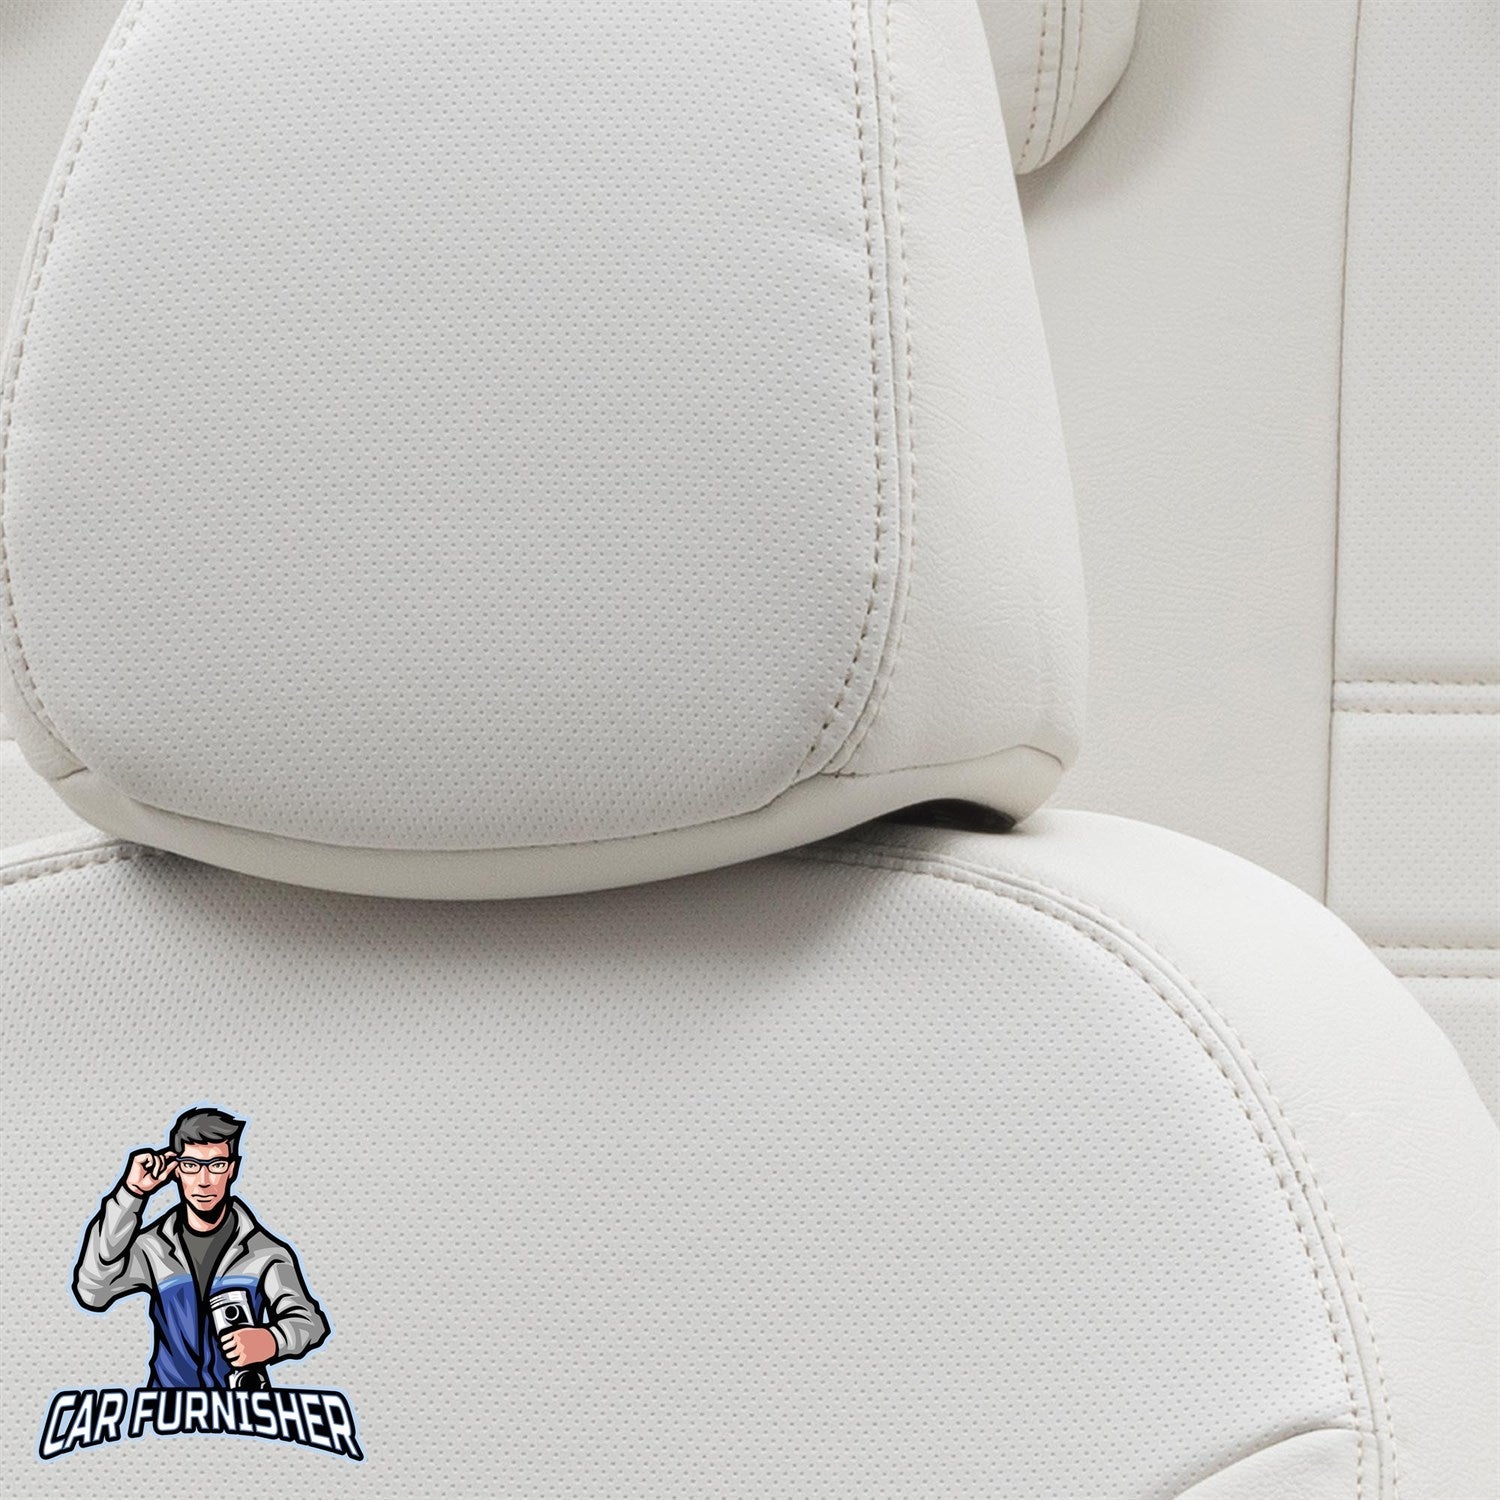 Mercedes B Class Seat Covers Istanbul Leather Design Ivory Leather